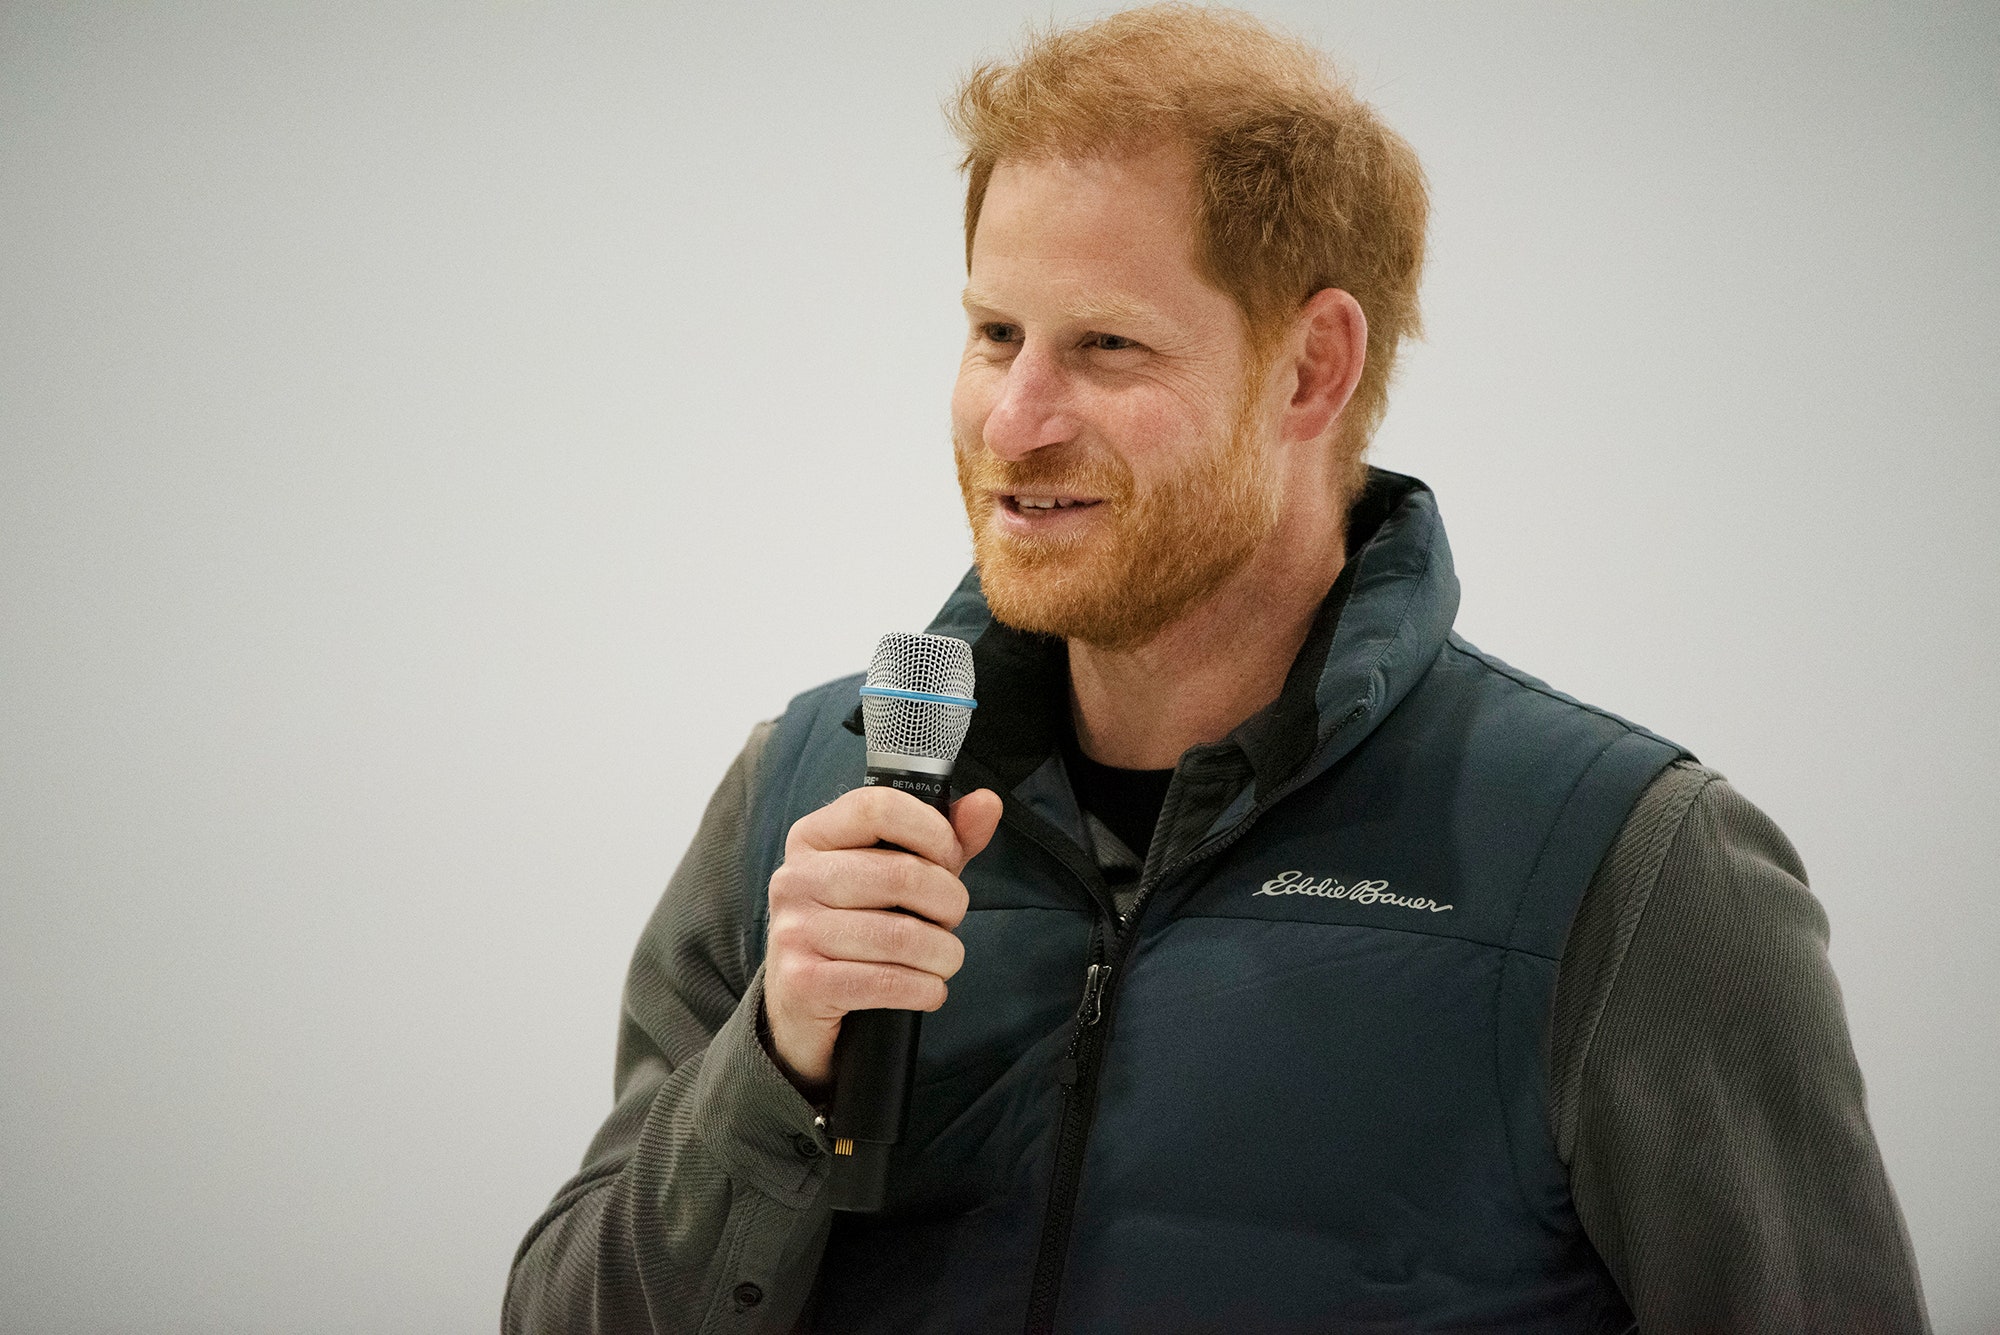 Prince Harry Gives Out a Soldier of the Year Award to a Friend He Made Through the Invictus Games